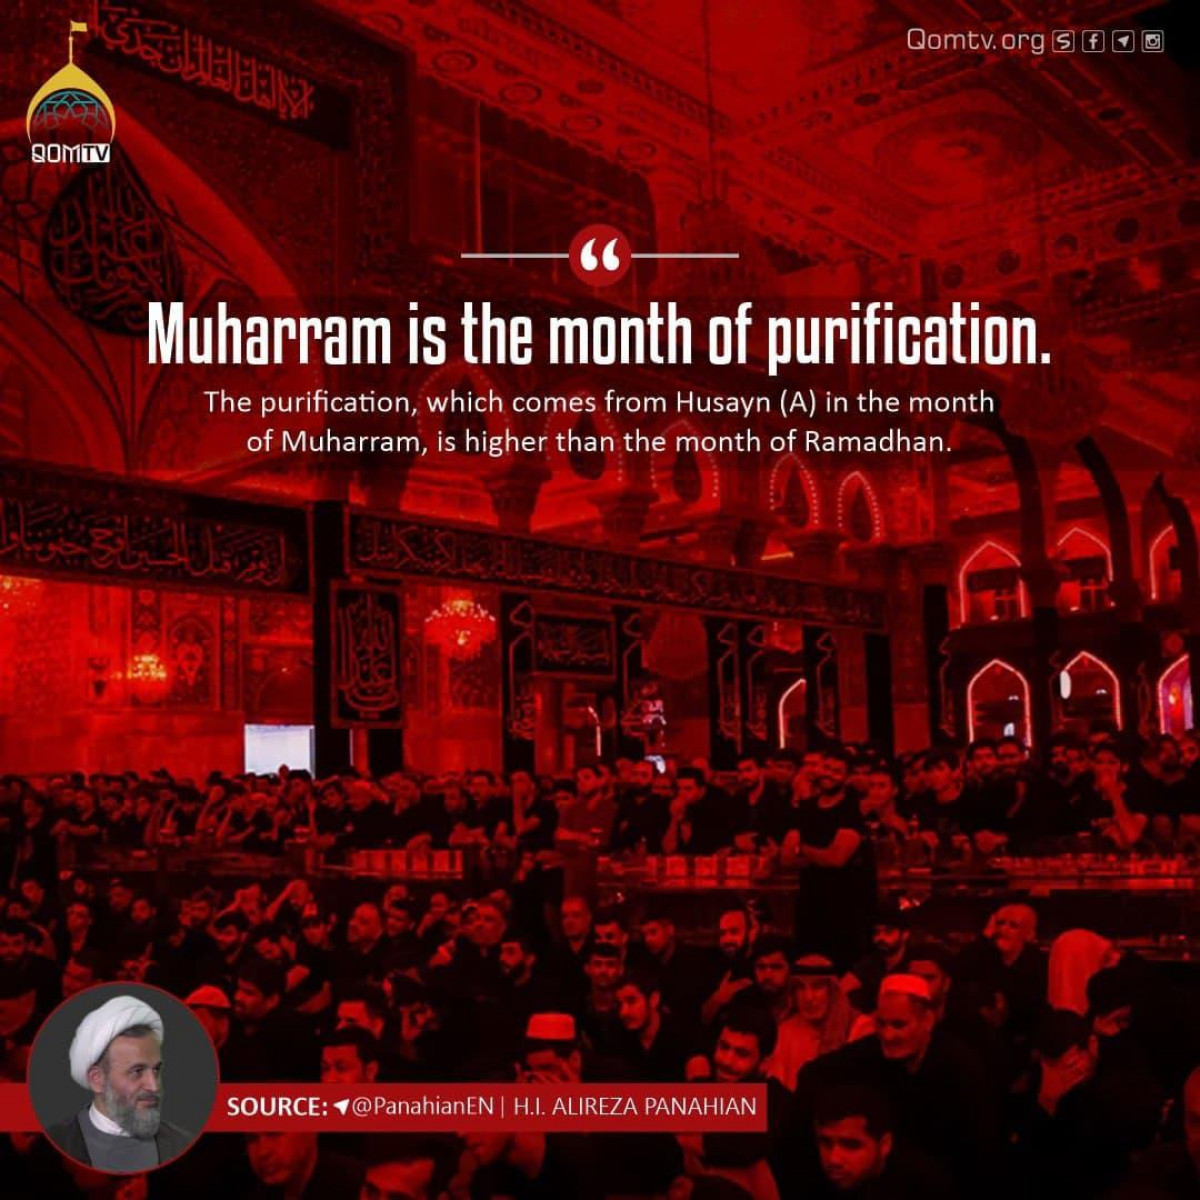 Muharram is the month of purification